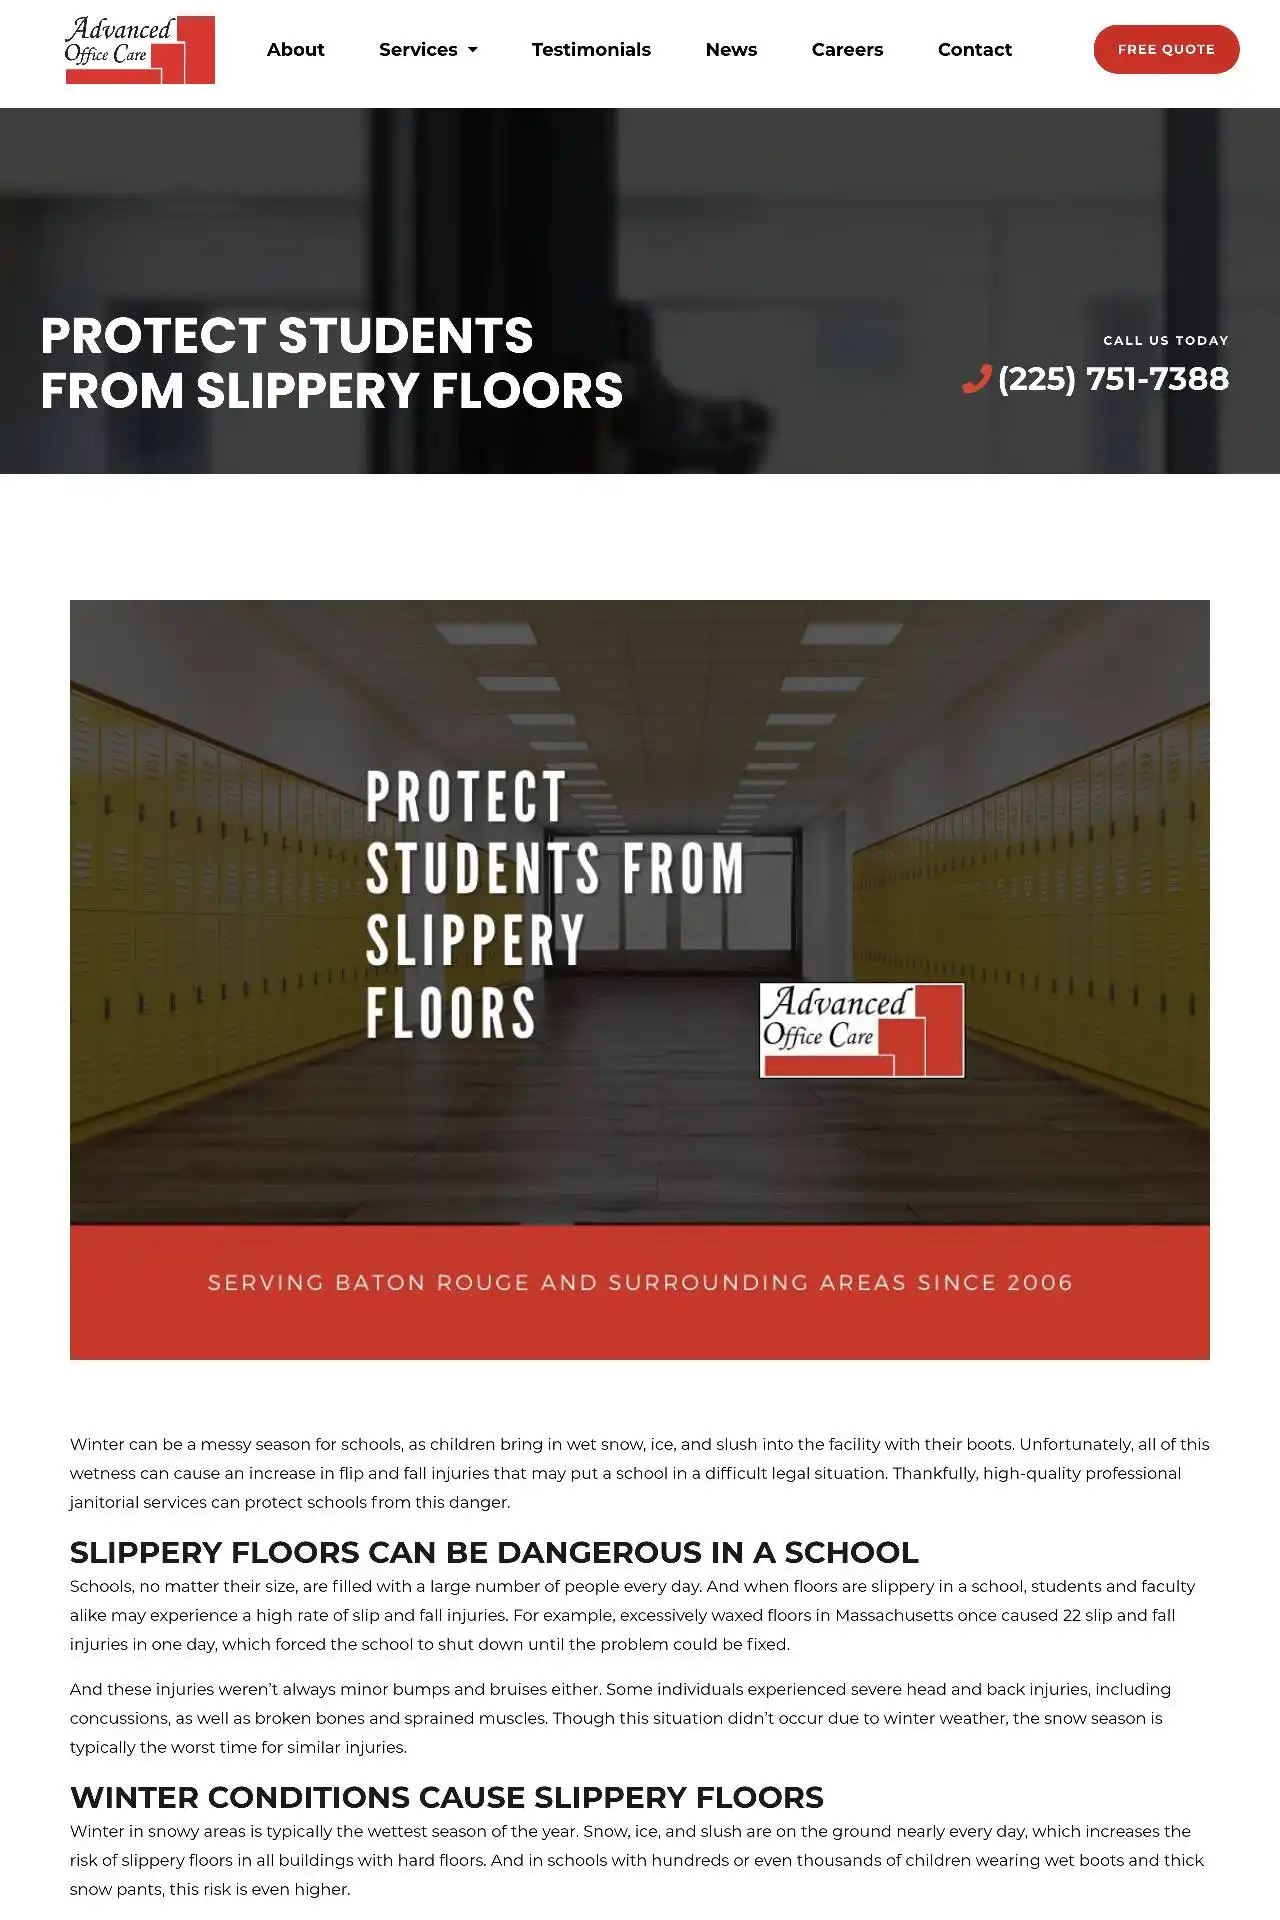 baton rouge cleaning company website design development https aocla.com cleaning protect students from slippery floors